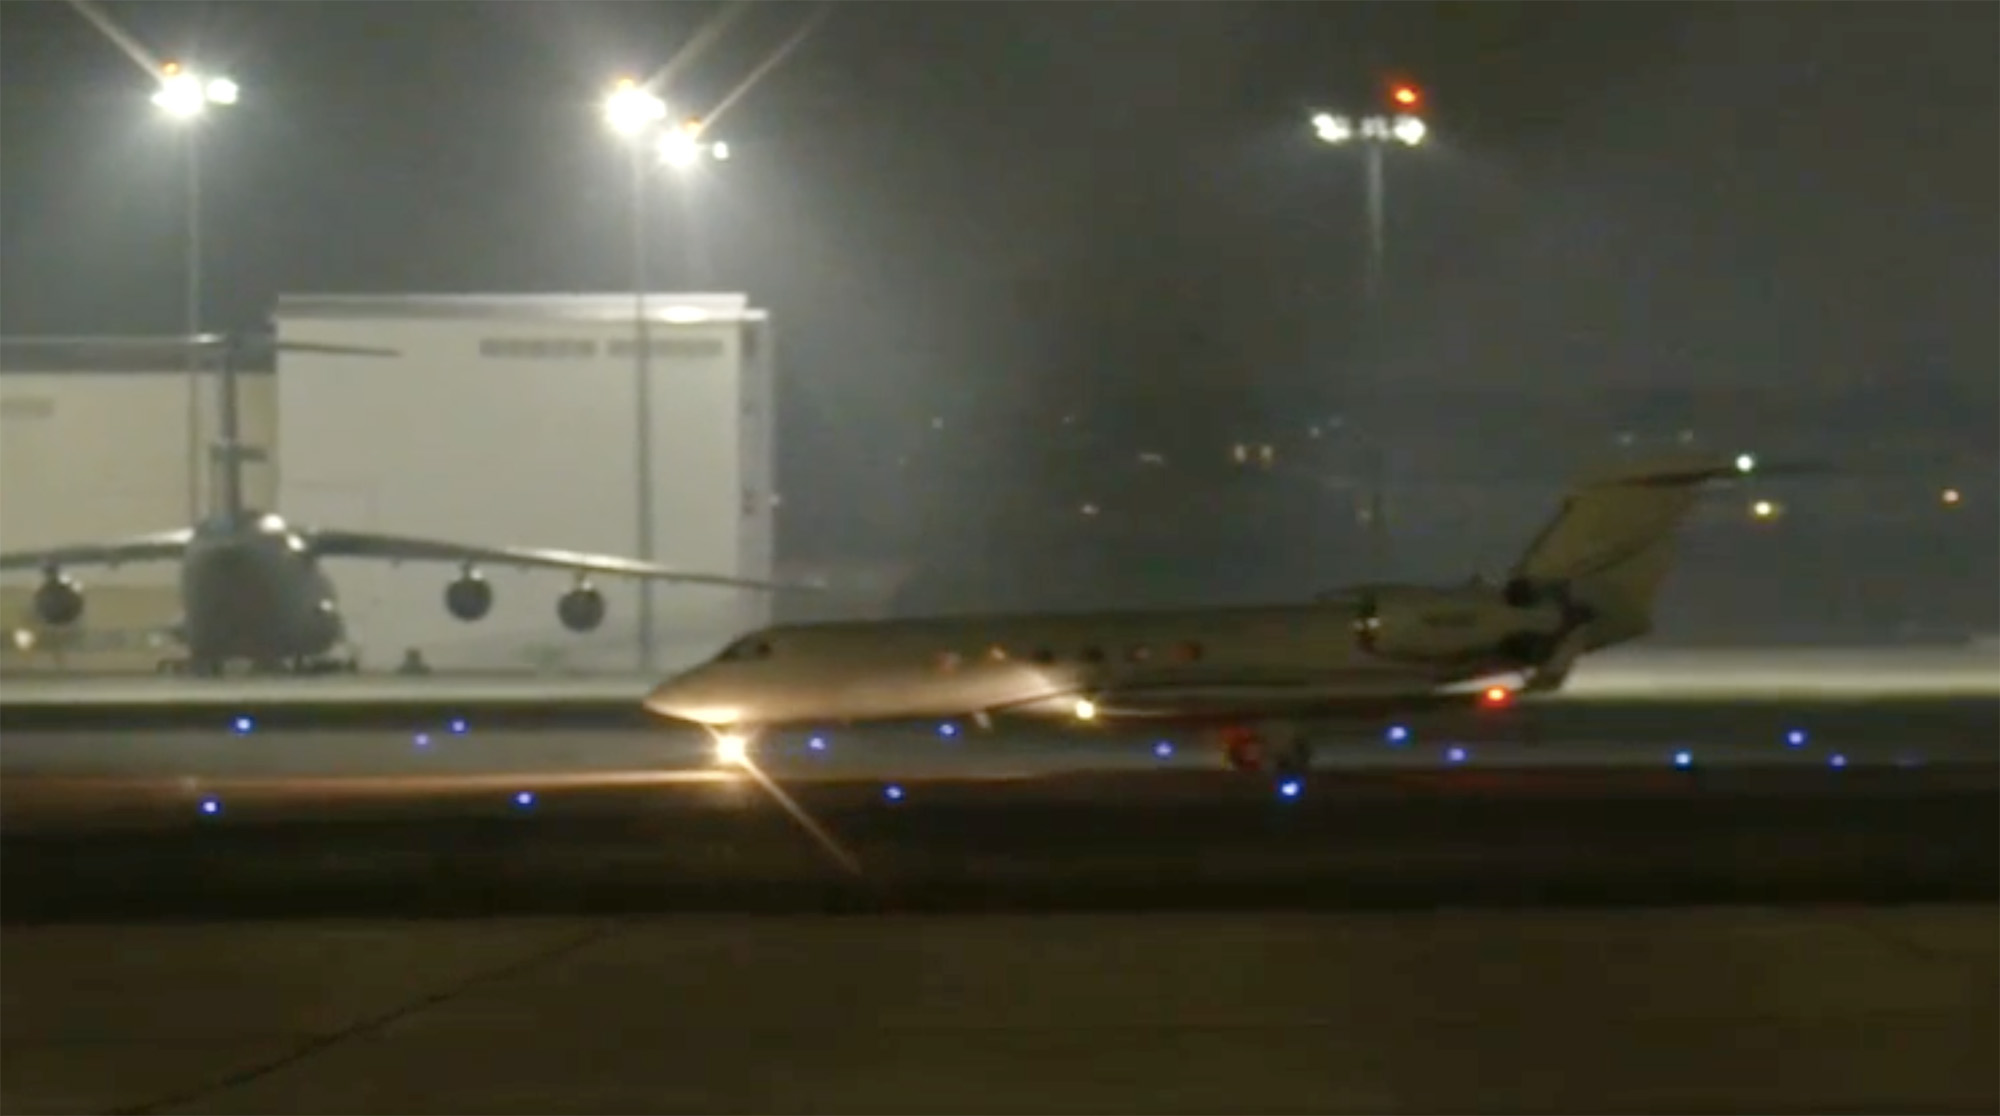 The plane carrying Brittney Griner arrives at San Antonio's Kelly Field on December 9.